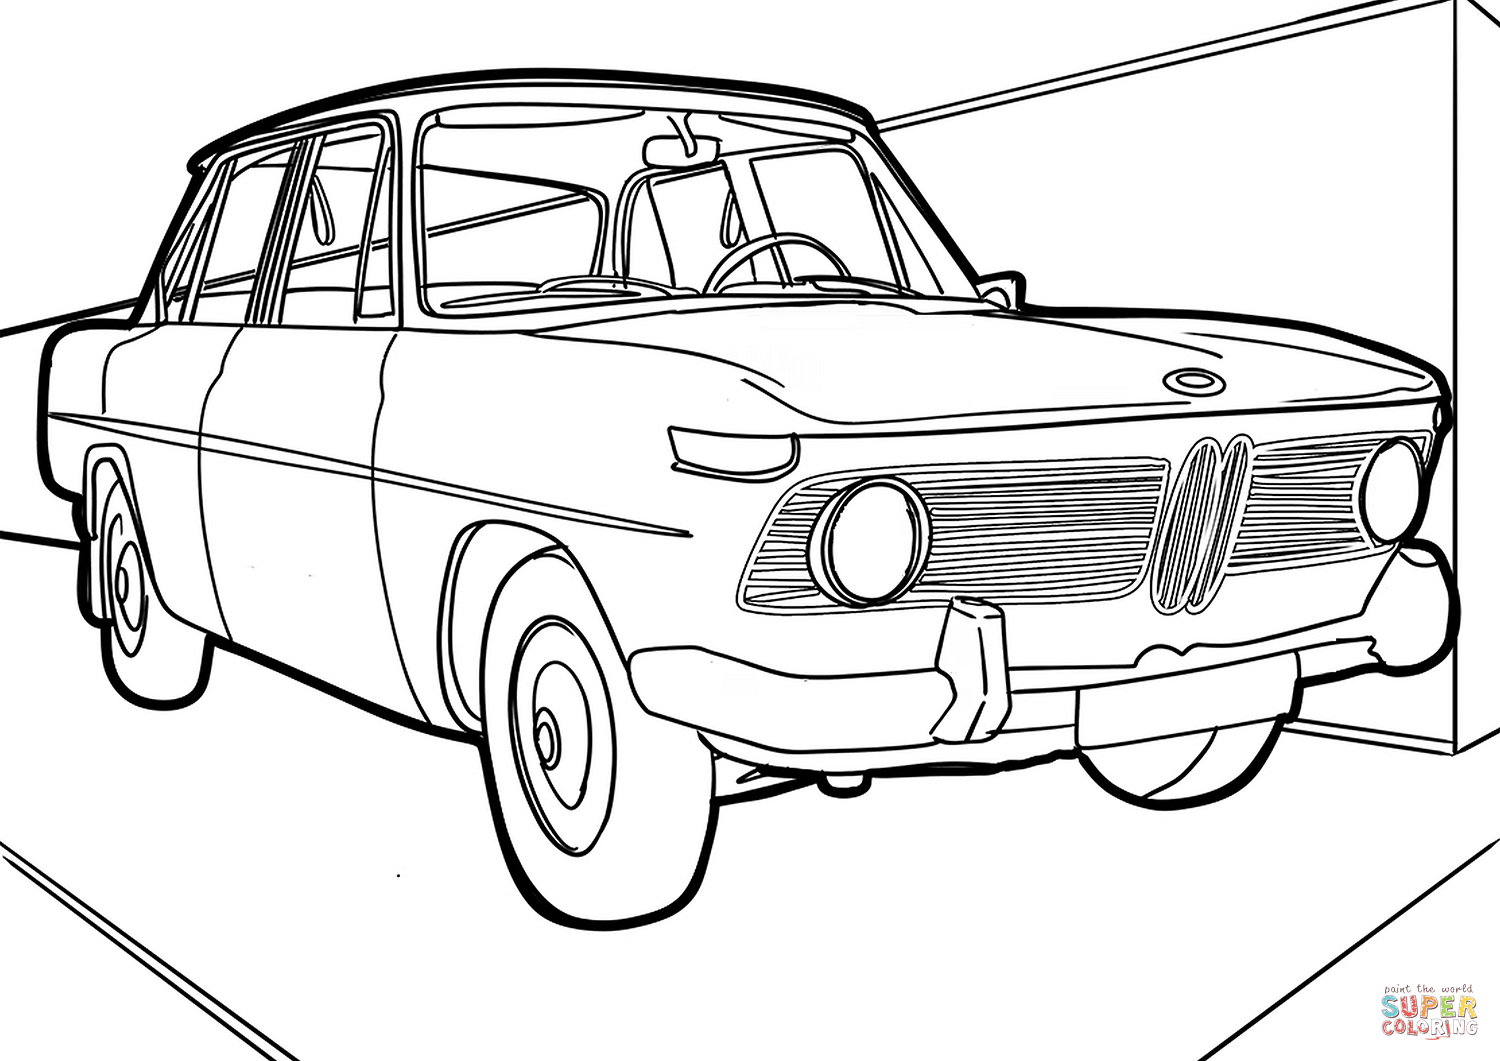 Retro bmw coloring page free printable coloring pages